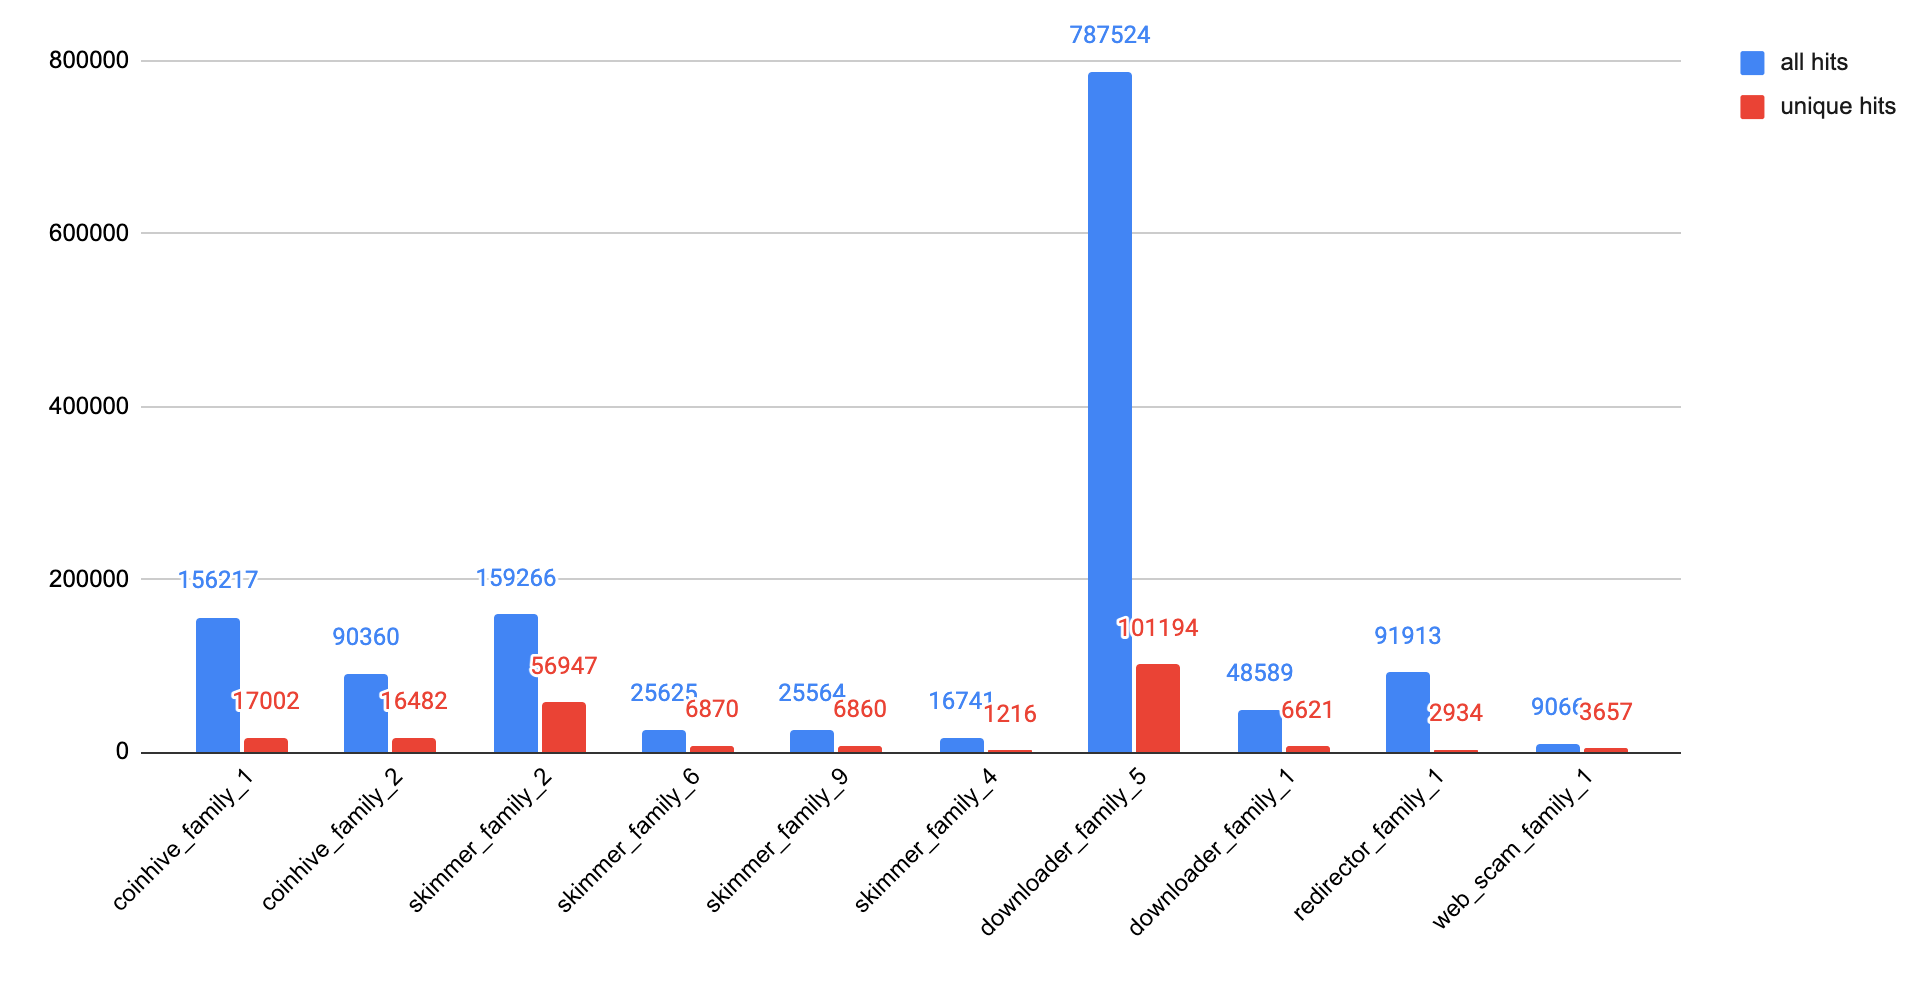 Bar chart showing the web threat families along the X-axis, and 0-200,000 on the Y-axis. Key indicates that blue bars are total hits, and red bars are unique hits. 